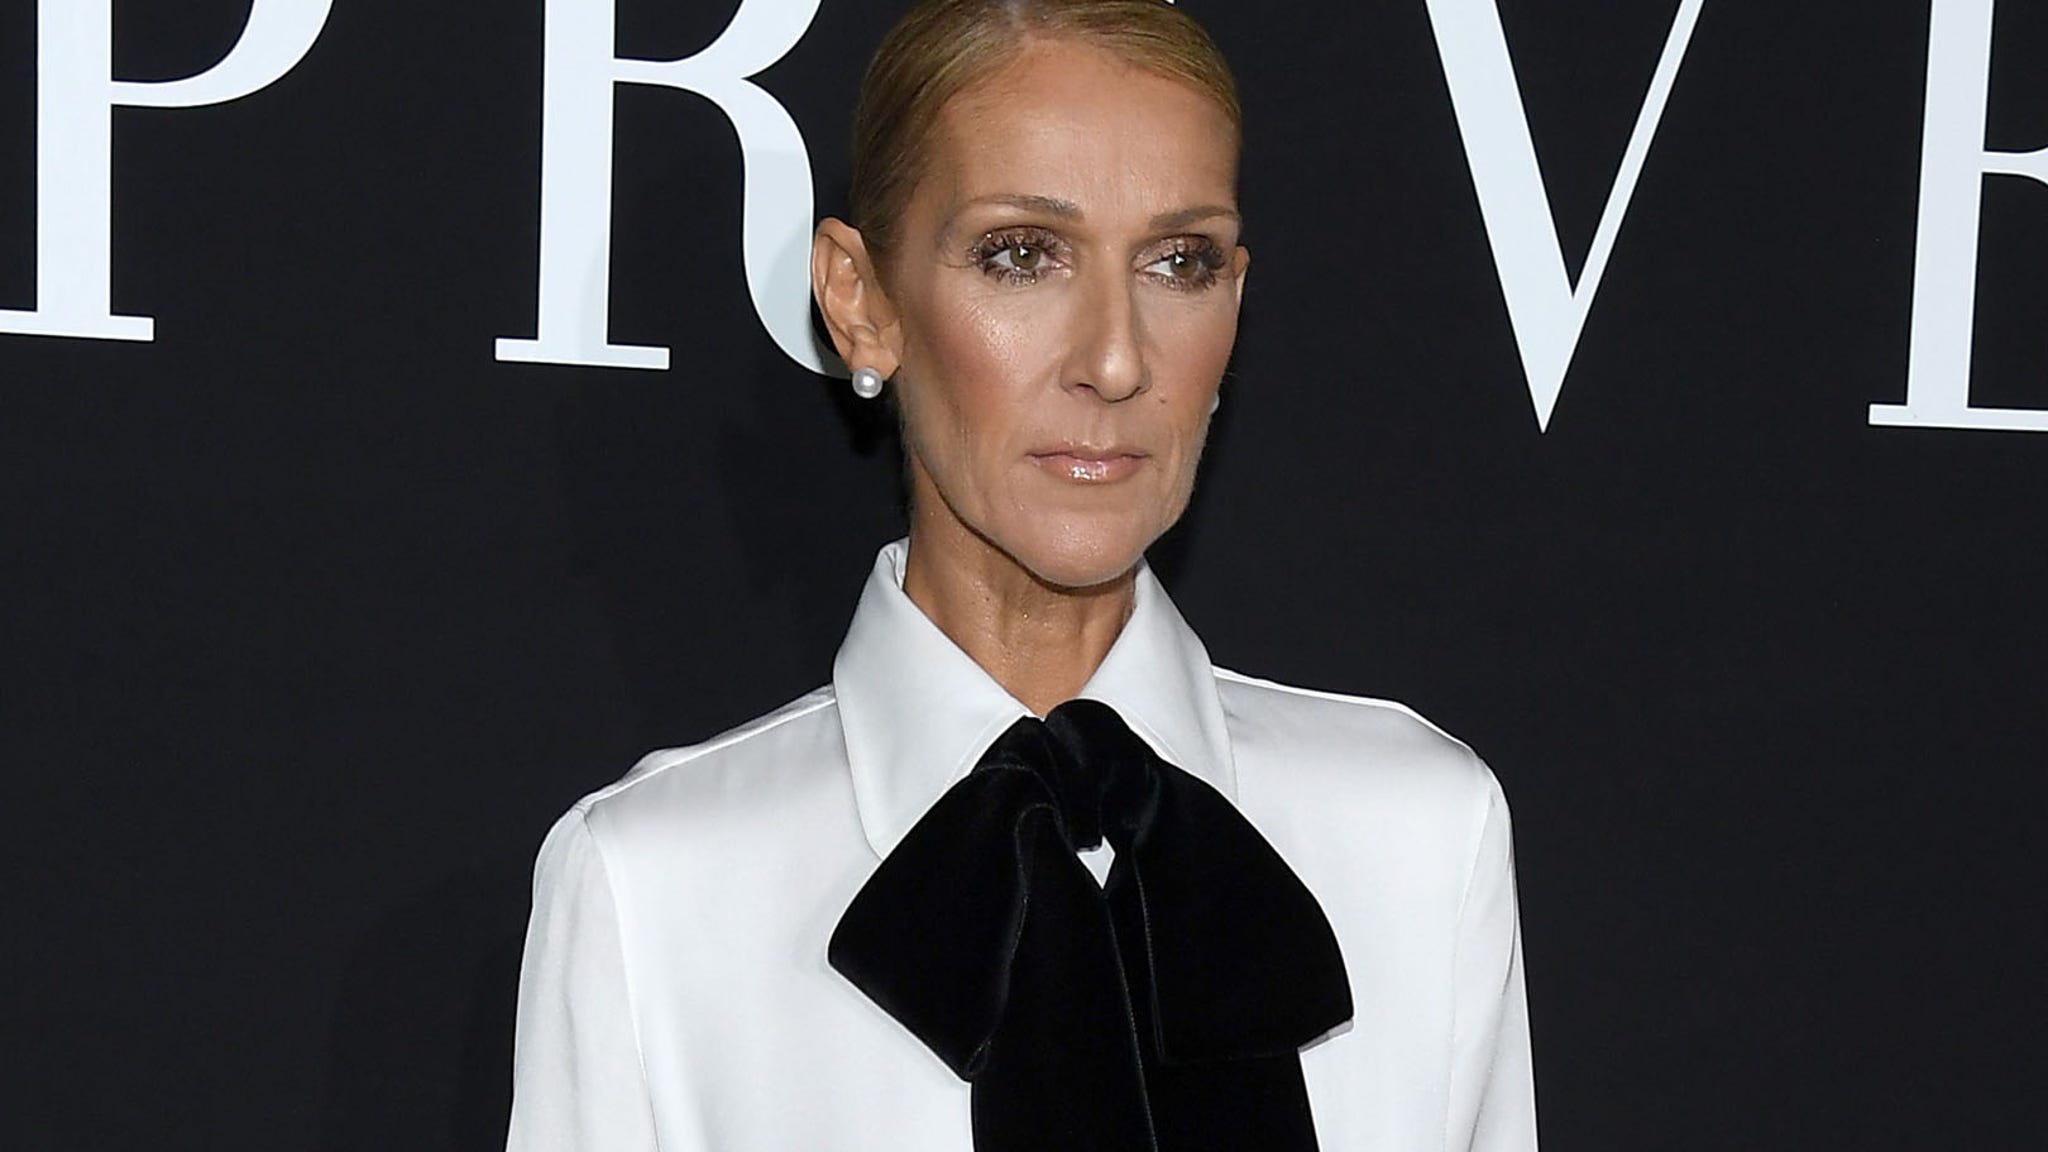 Celine Dion Claps Back at Body Shamers Saying She's Too Thin